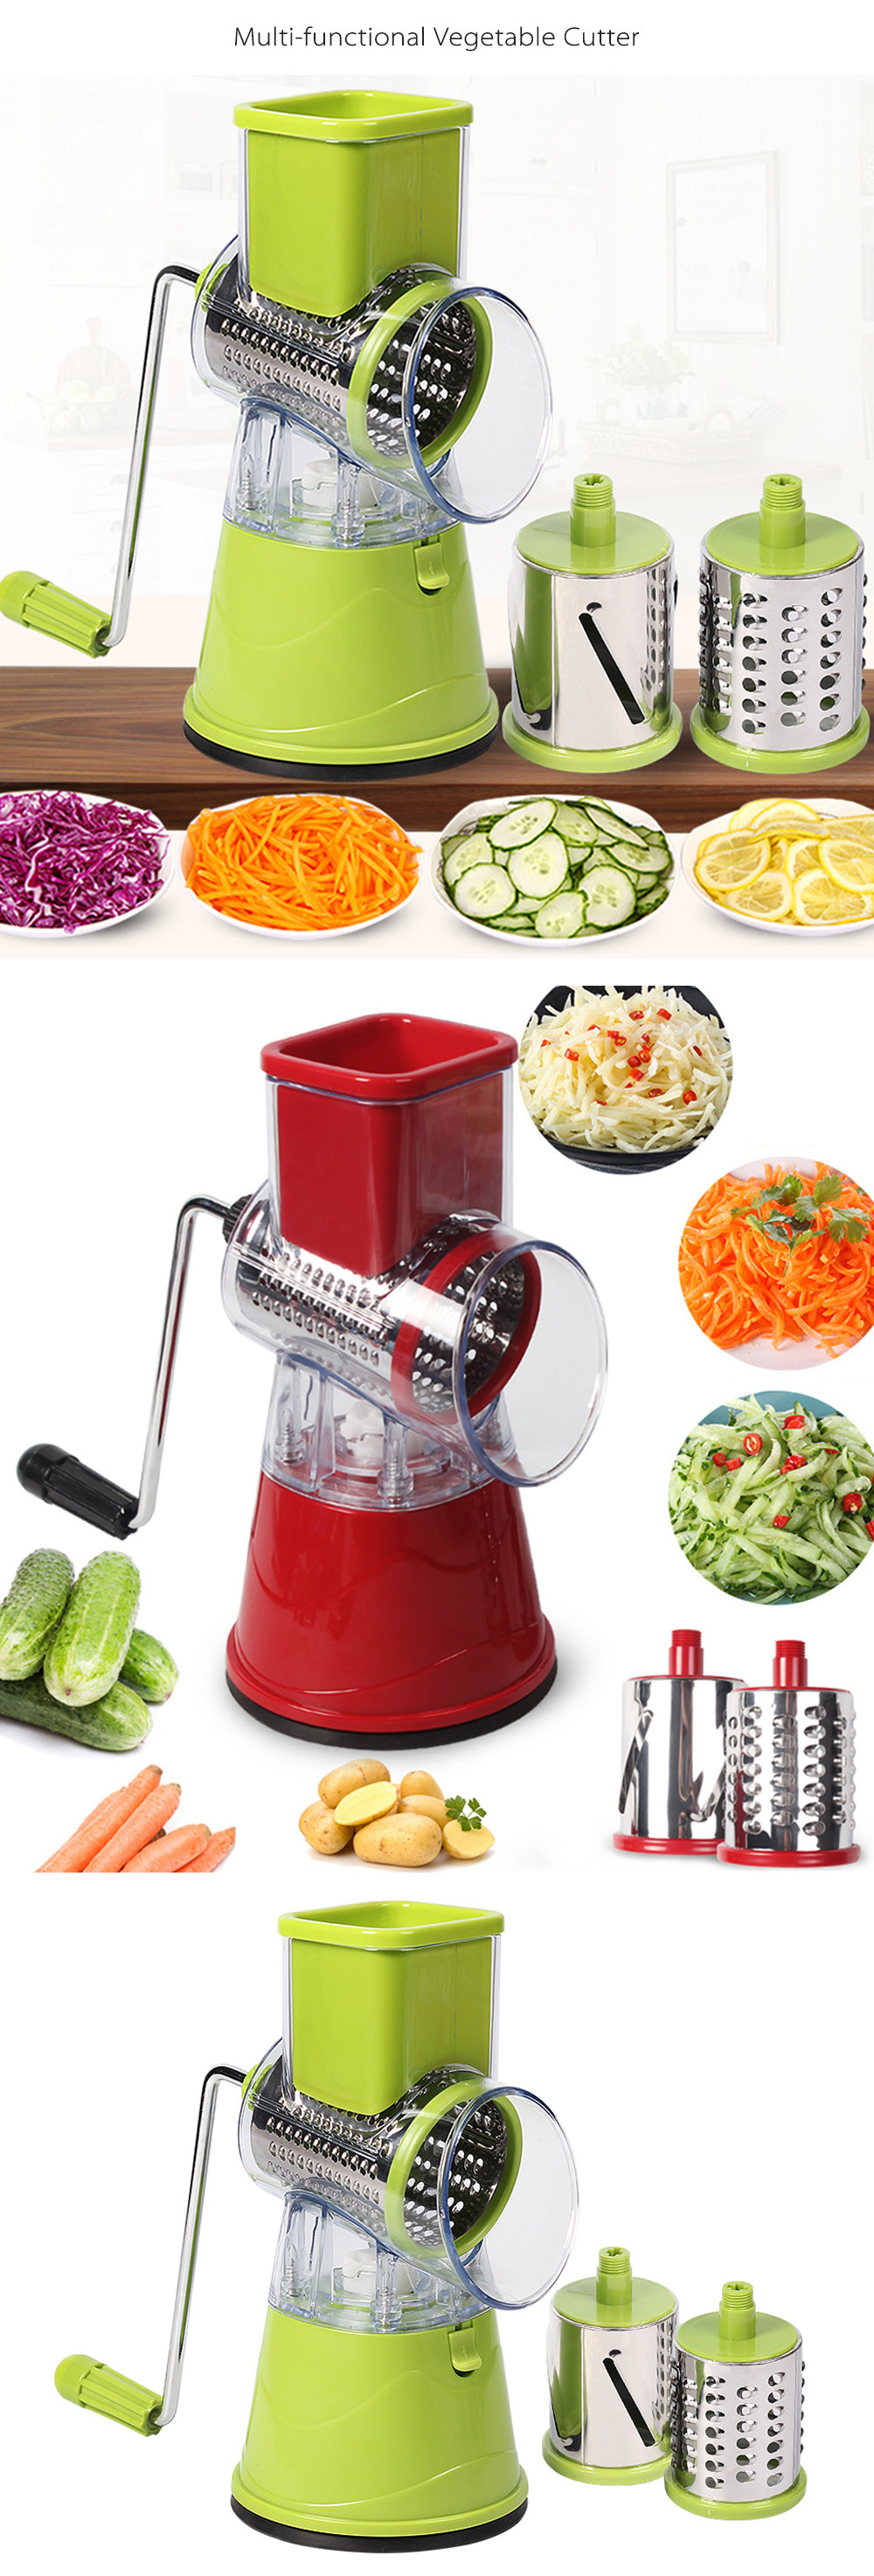 Hex Nut Vegetable Spiral Slicer - Make A Carrot Flower from Apollo Box